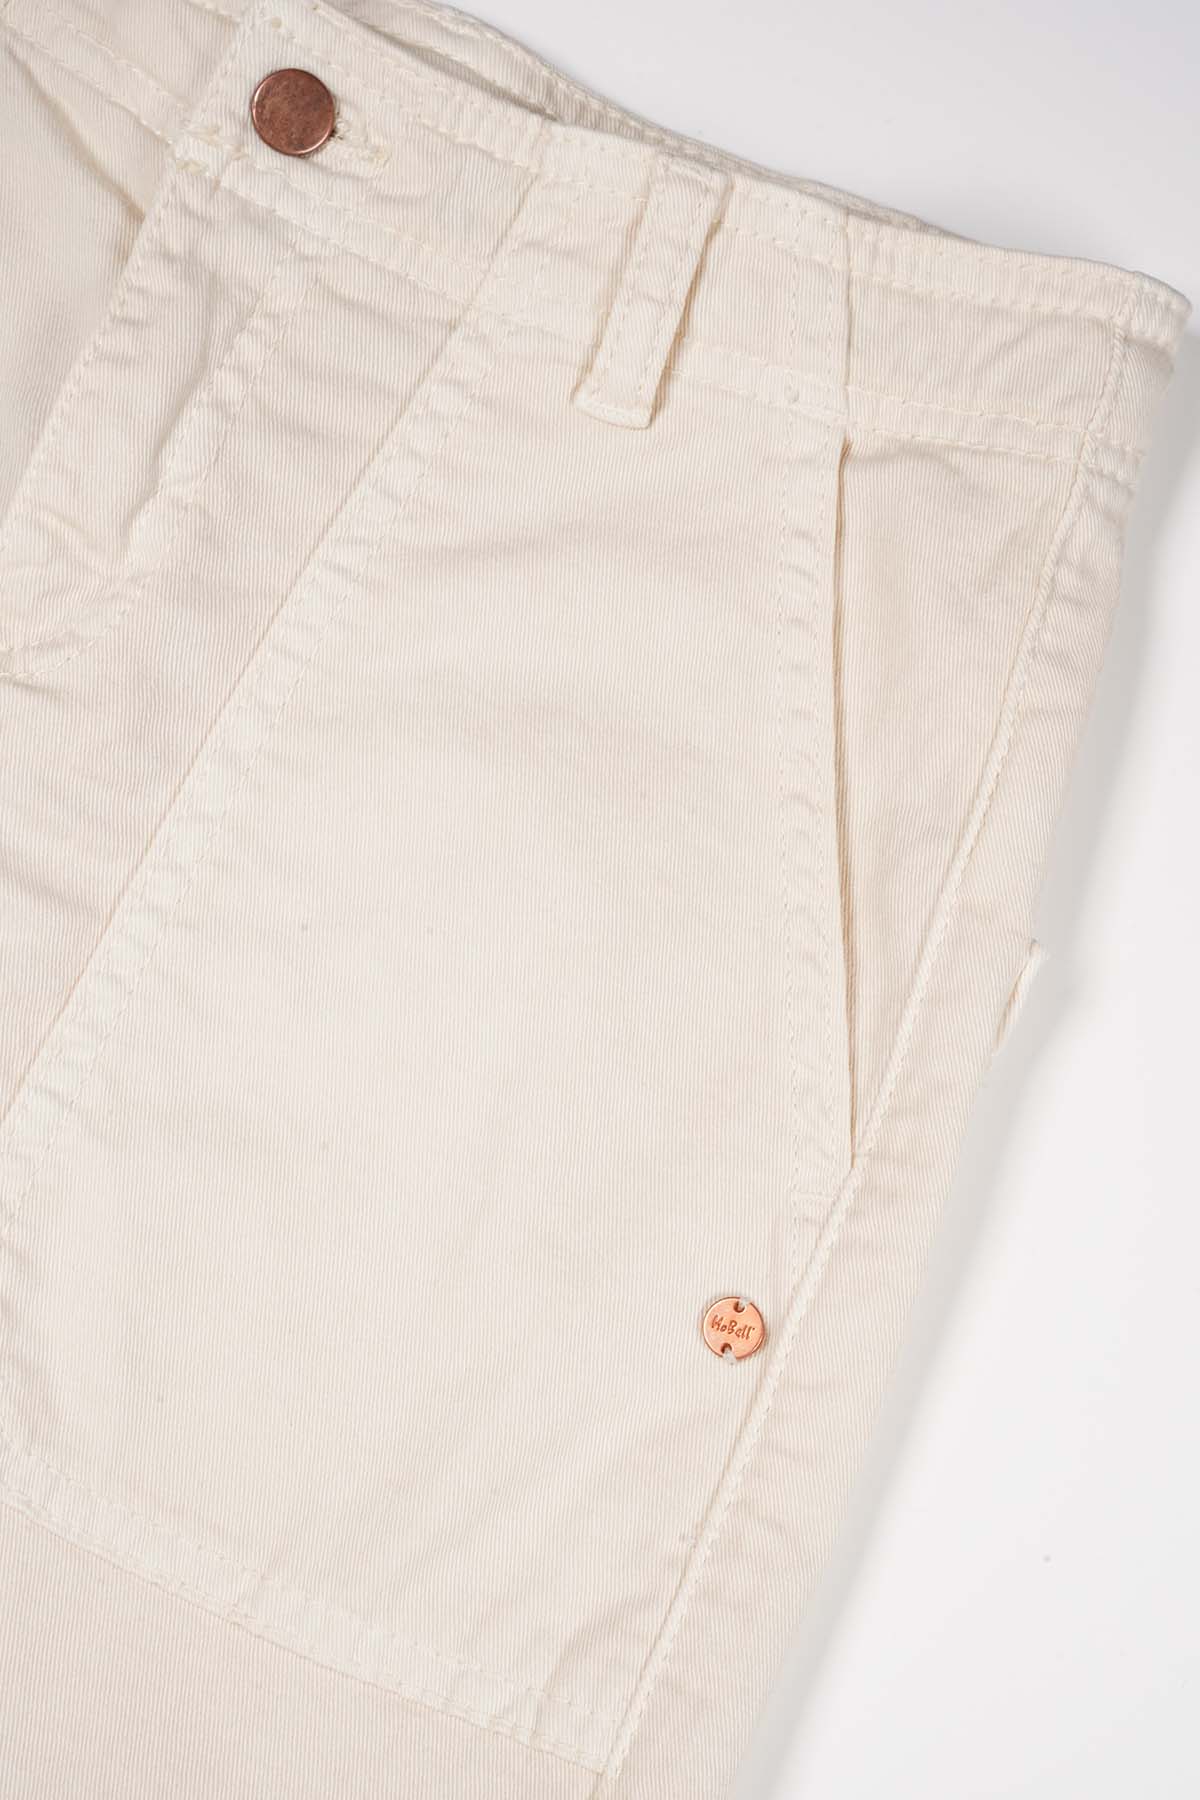 NoBell Susy Garment Dyed Stretch Twill Cargo Pants